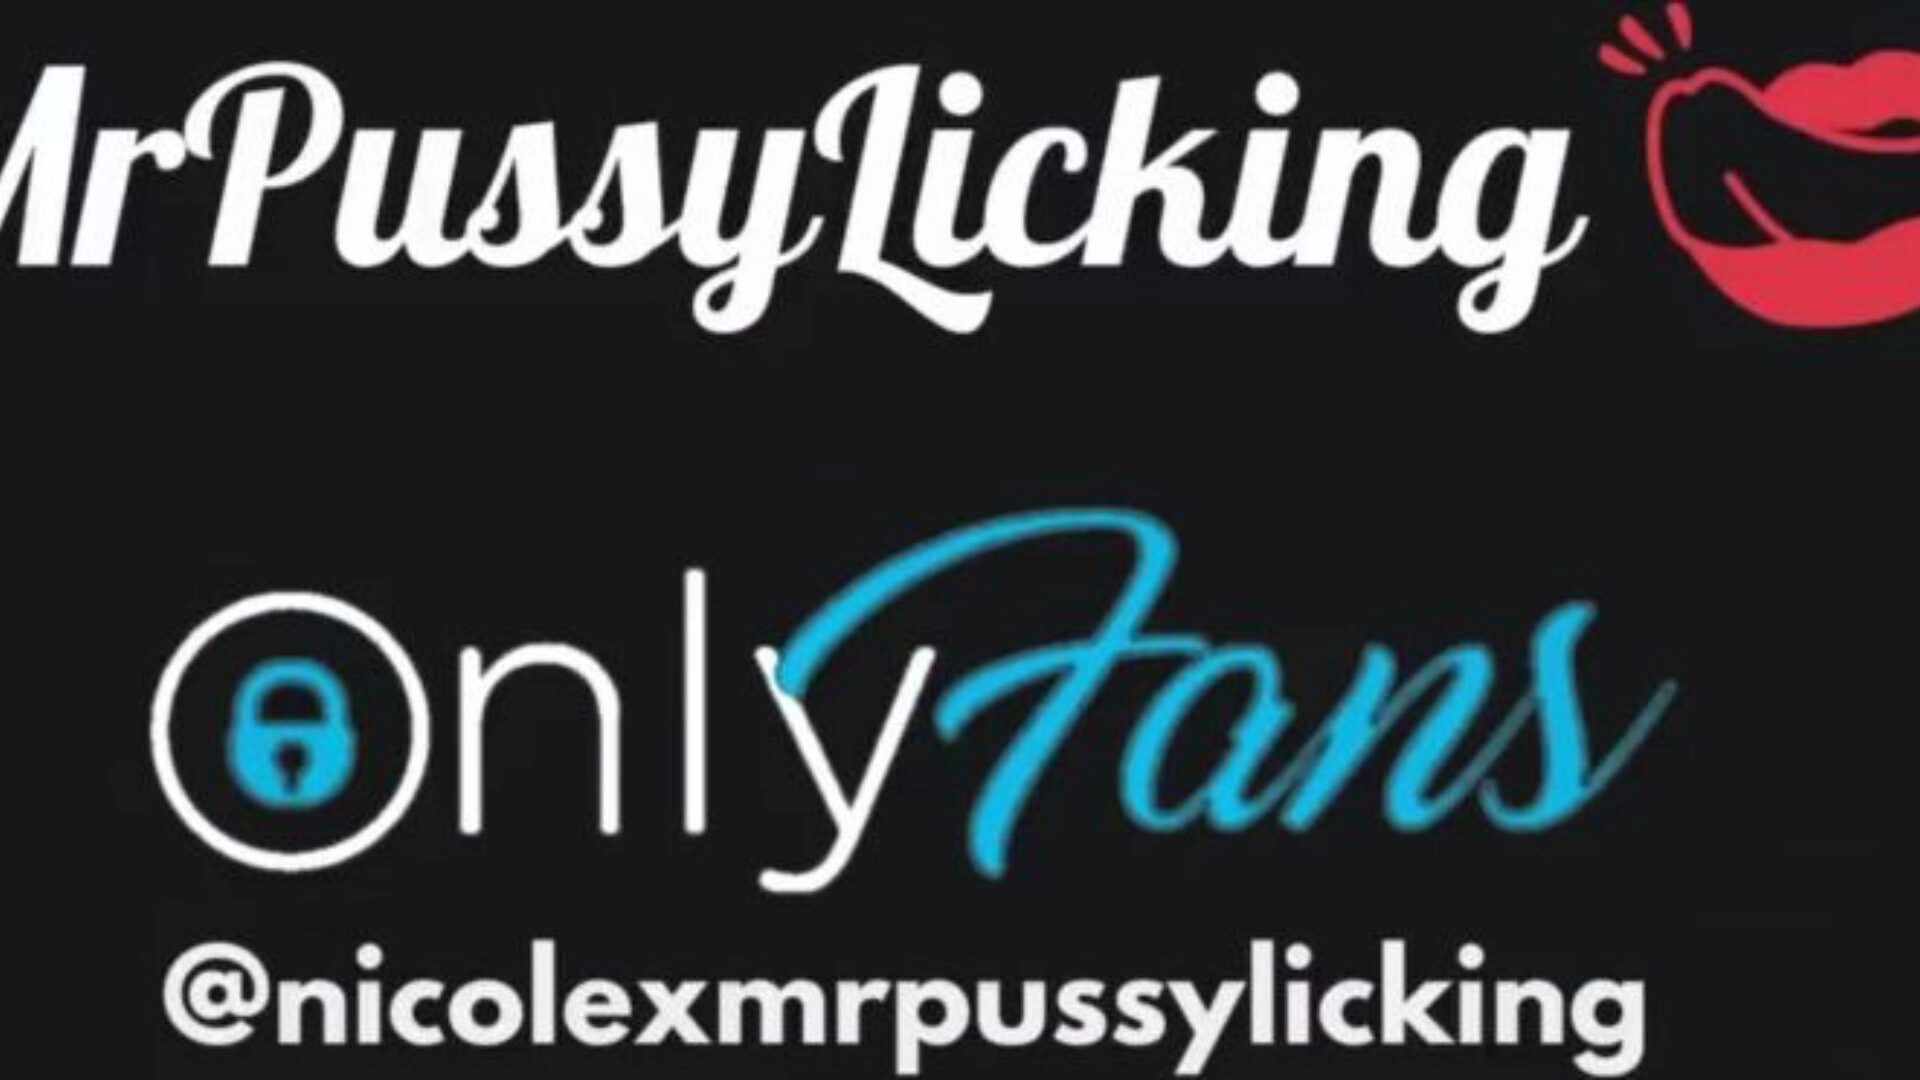 Clit Licking and Pussy Eating in Facesitting Until Explosive Orgasm of Amateur Teen - EXTREME CLOSE UP MrPussyLicking